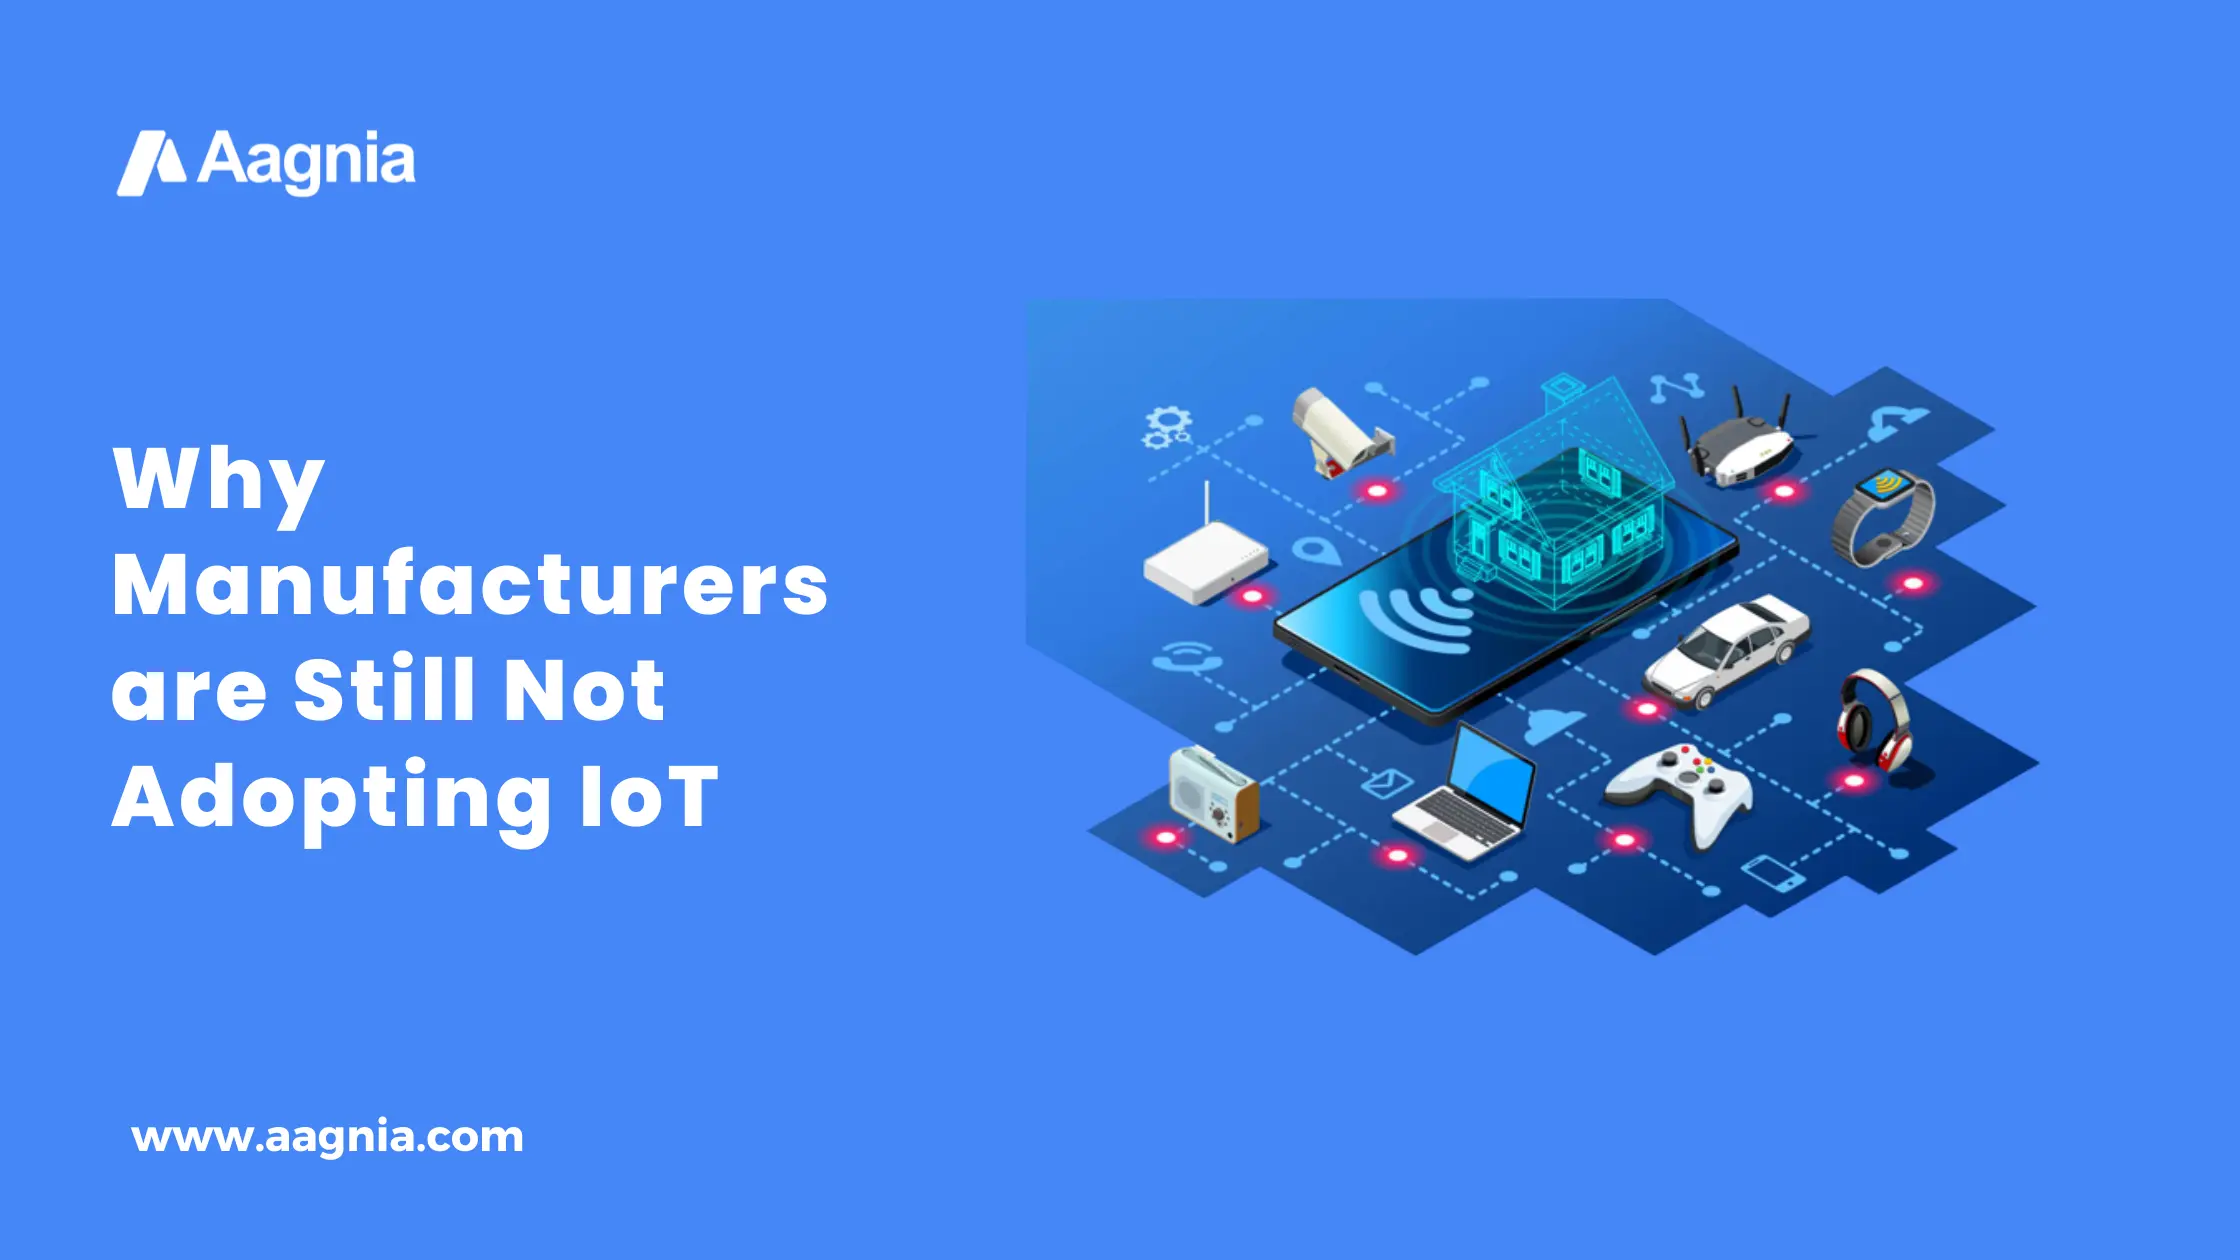 Why Manufacturers are still not adopting IoT